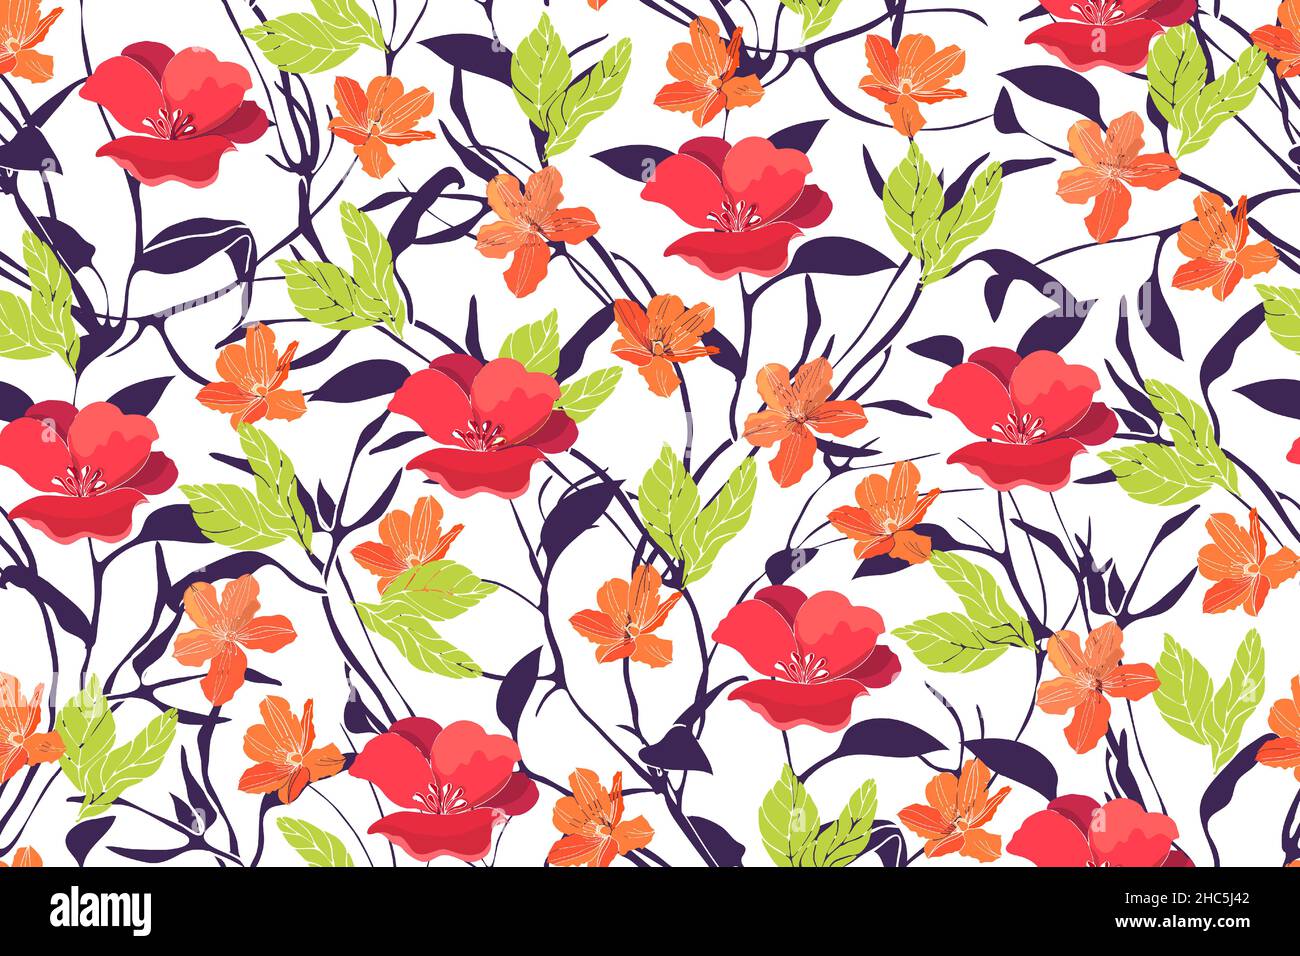 Art floral vector seamless pattern Spring flowers  Stock Vector